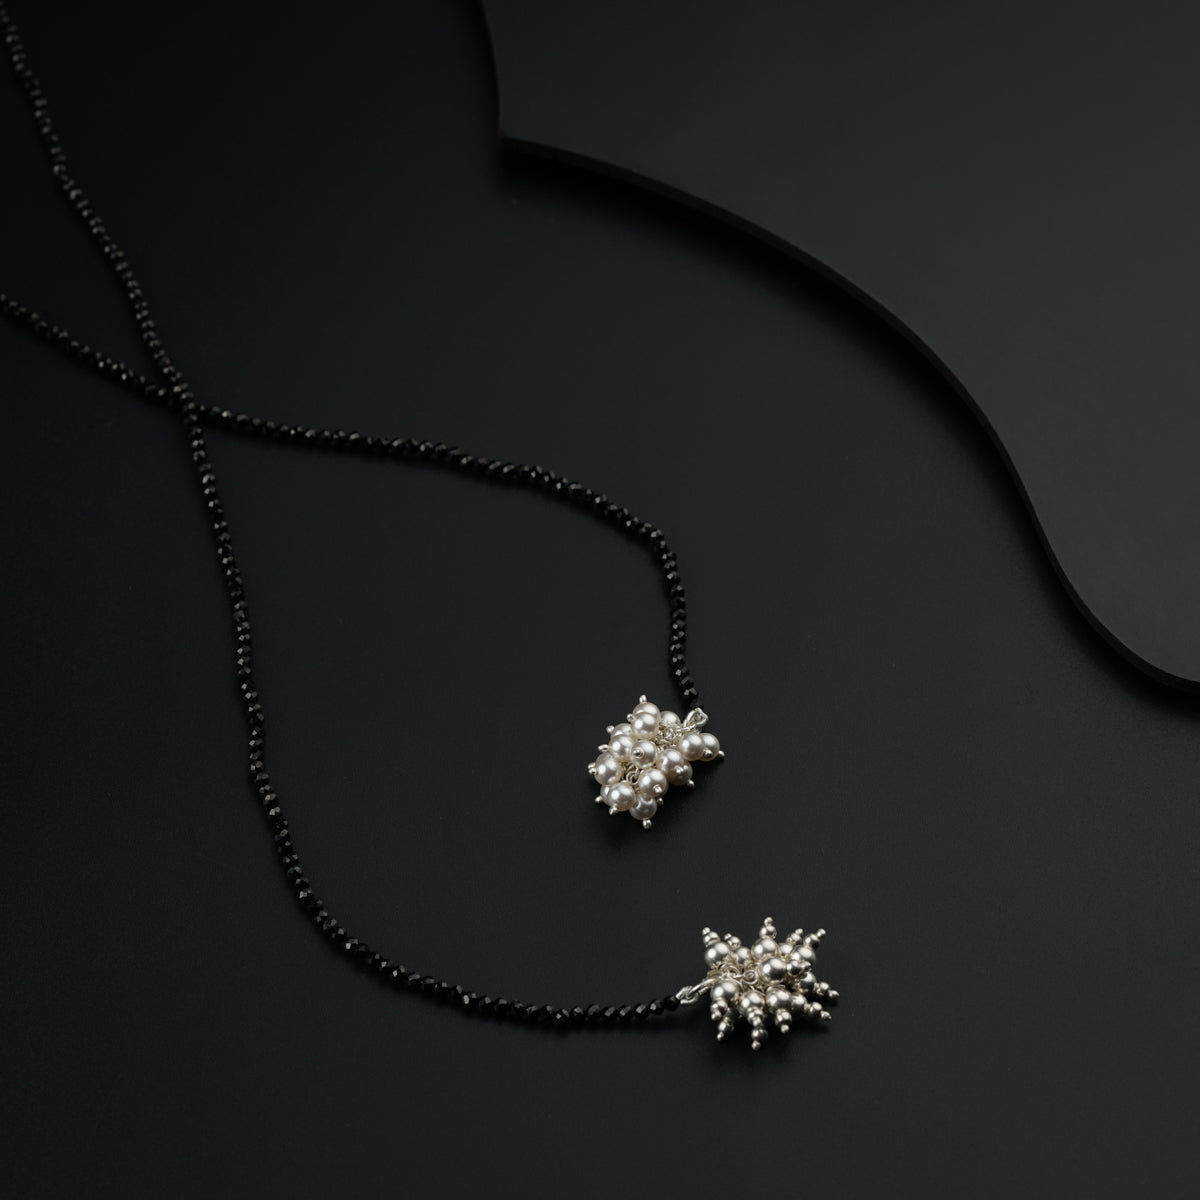 two necklaces with pearls on a black surface